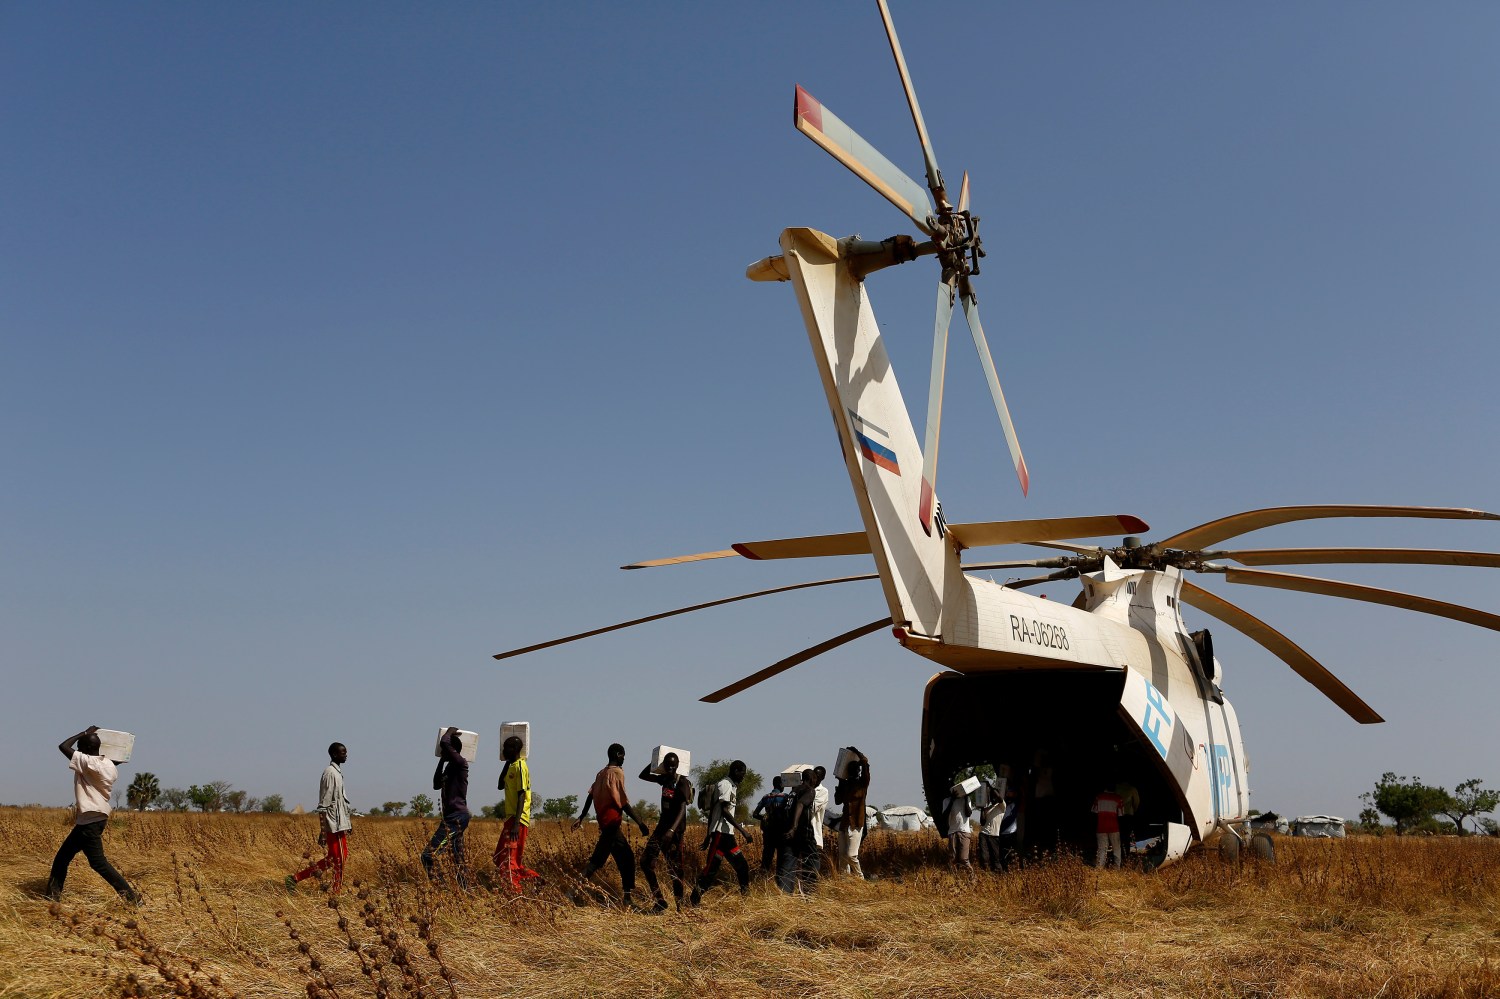 Men unload boxes of nutritional supplements from an helicopter prior to a humanitarian food distribution